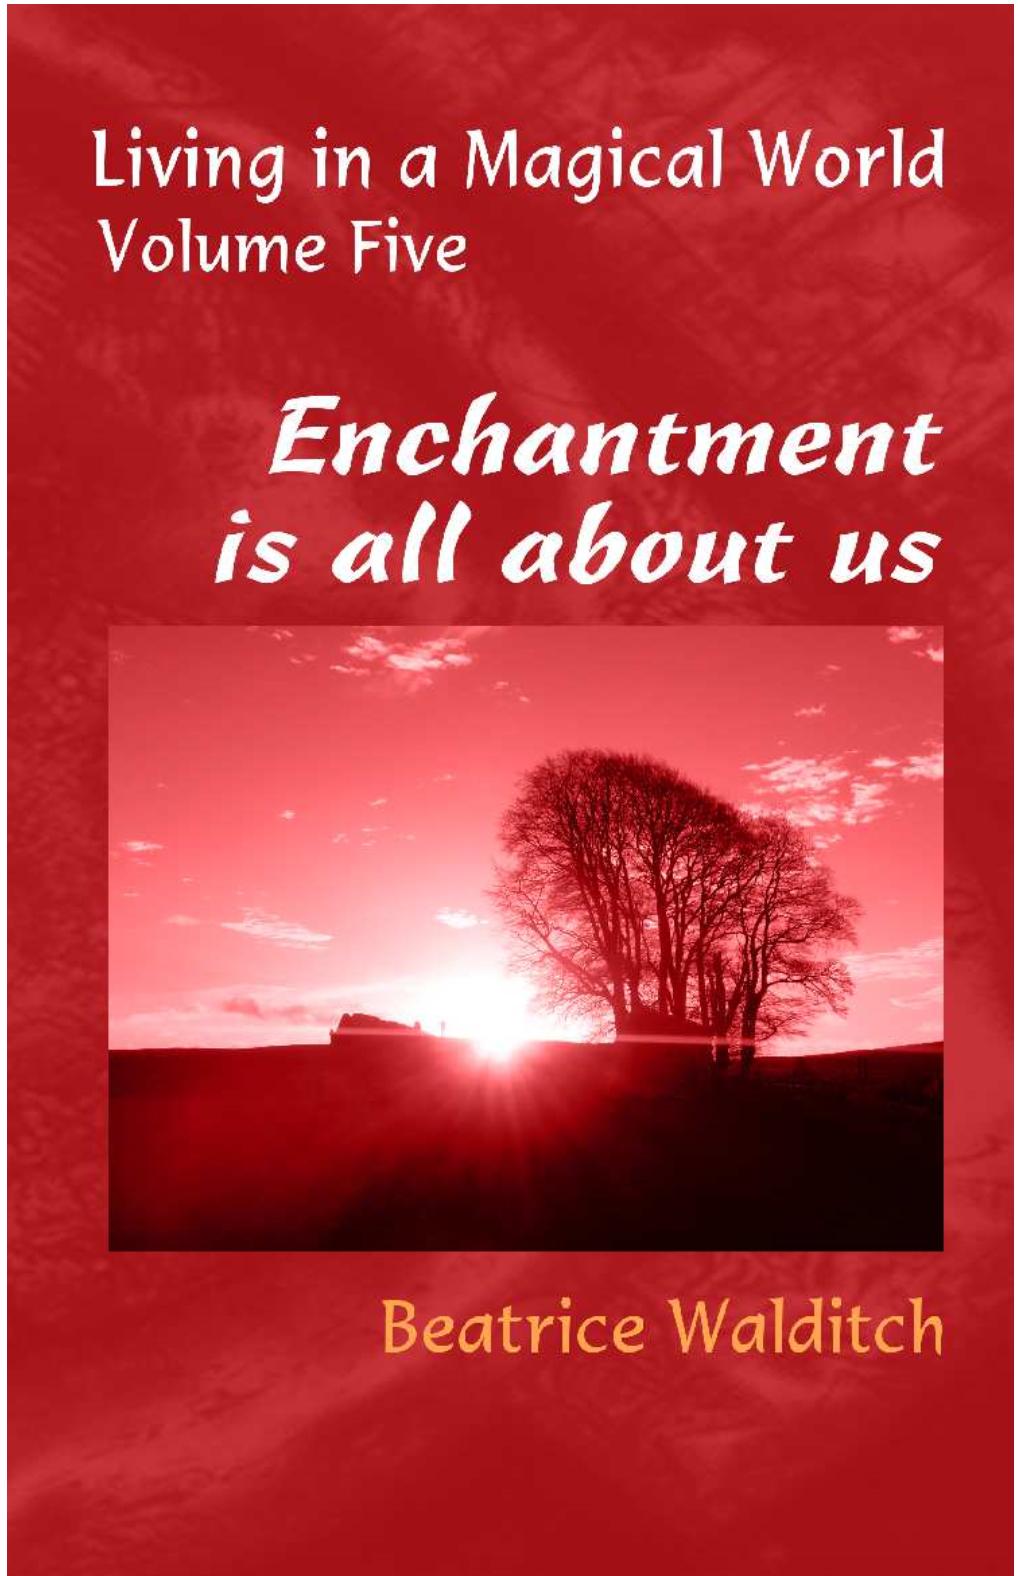 Download Enchantment Is All About Us for FREE